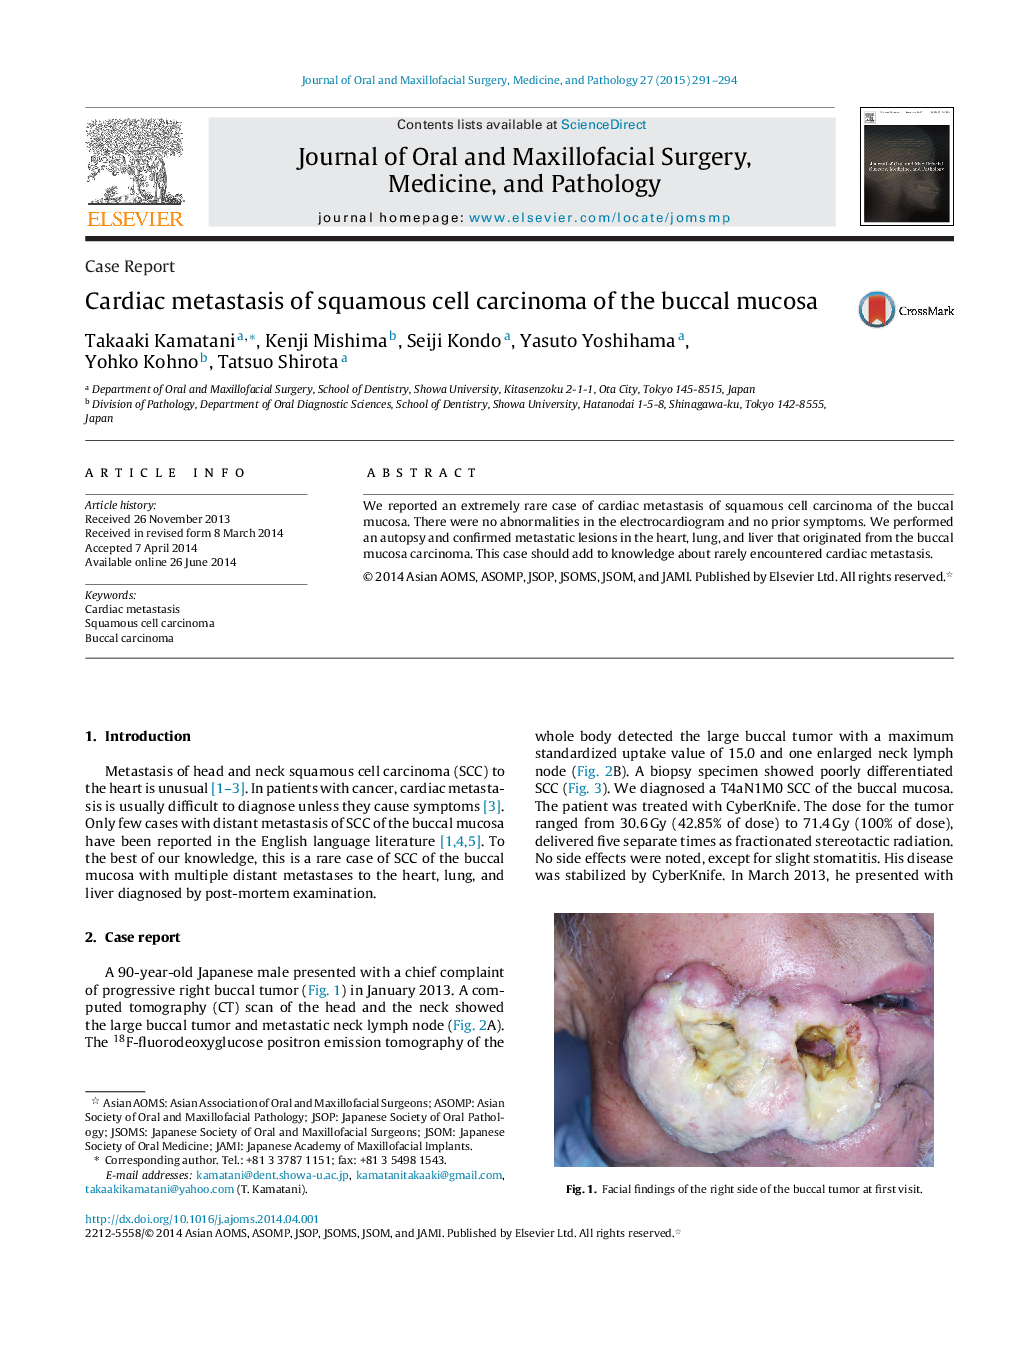 Cardiac metastasis of squamous cell carcinoma of the buccal mucosa 